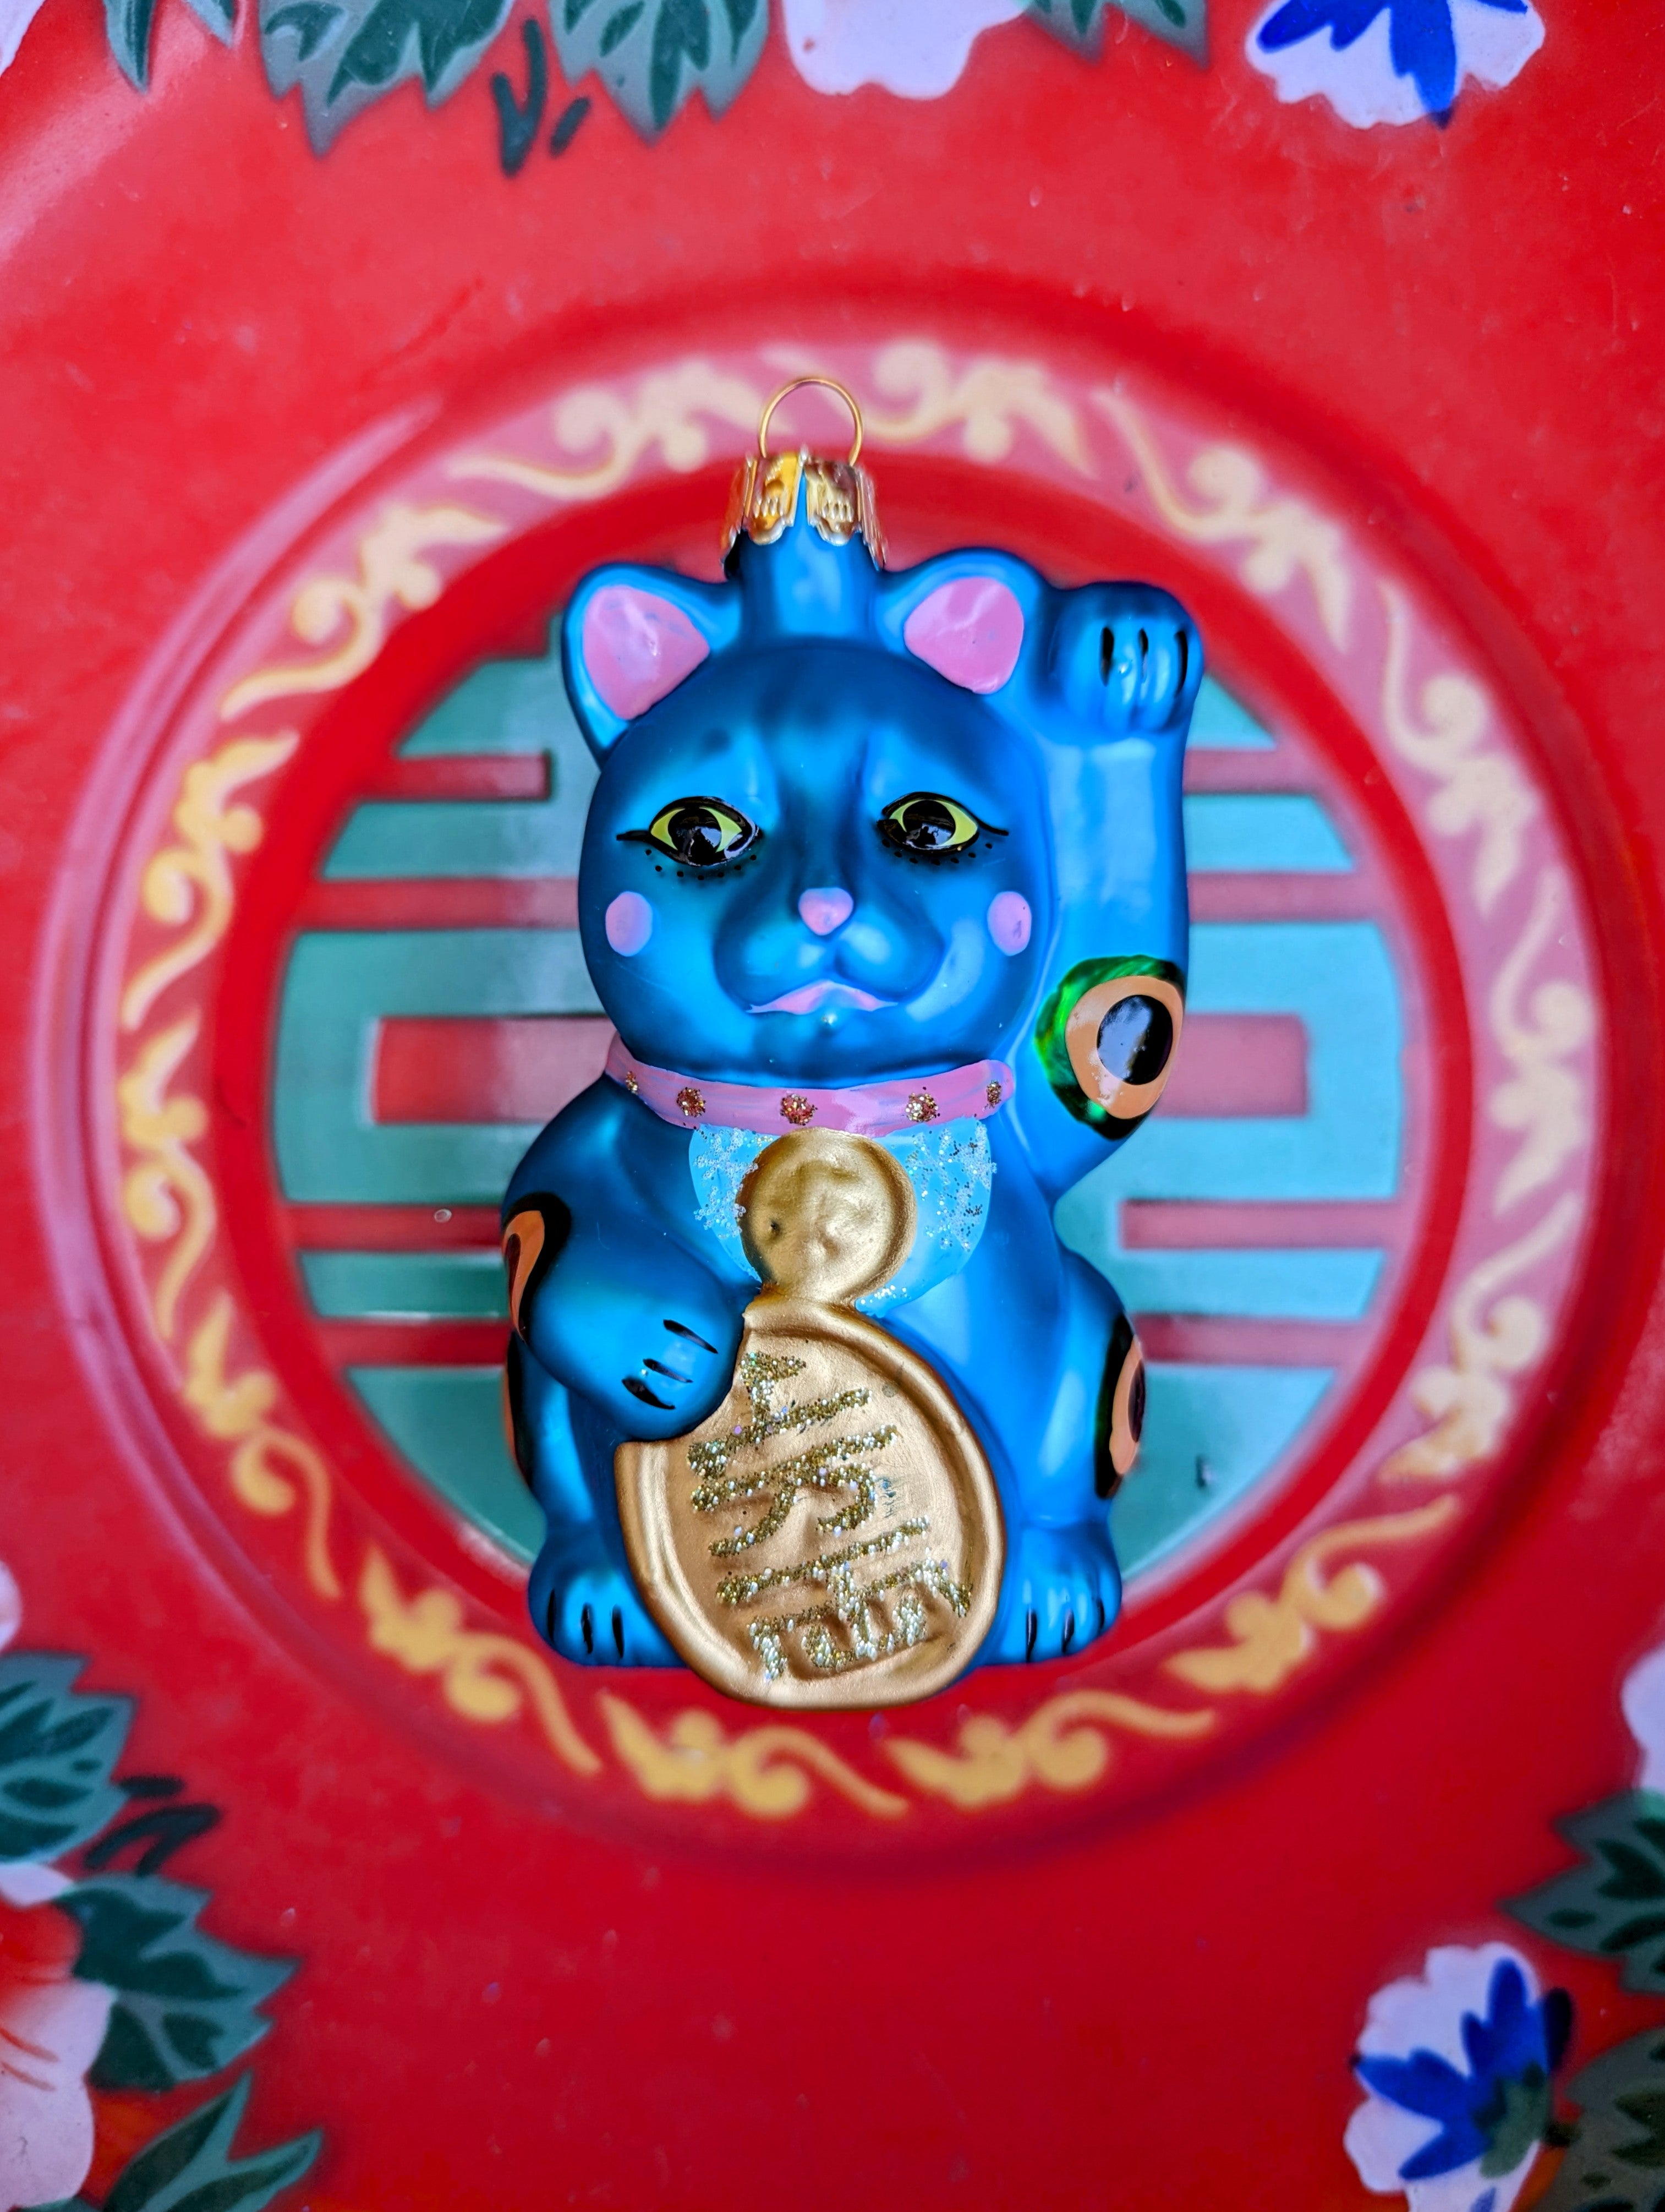 Brightest lucky cat glass decoration